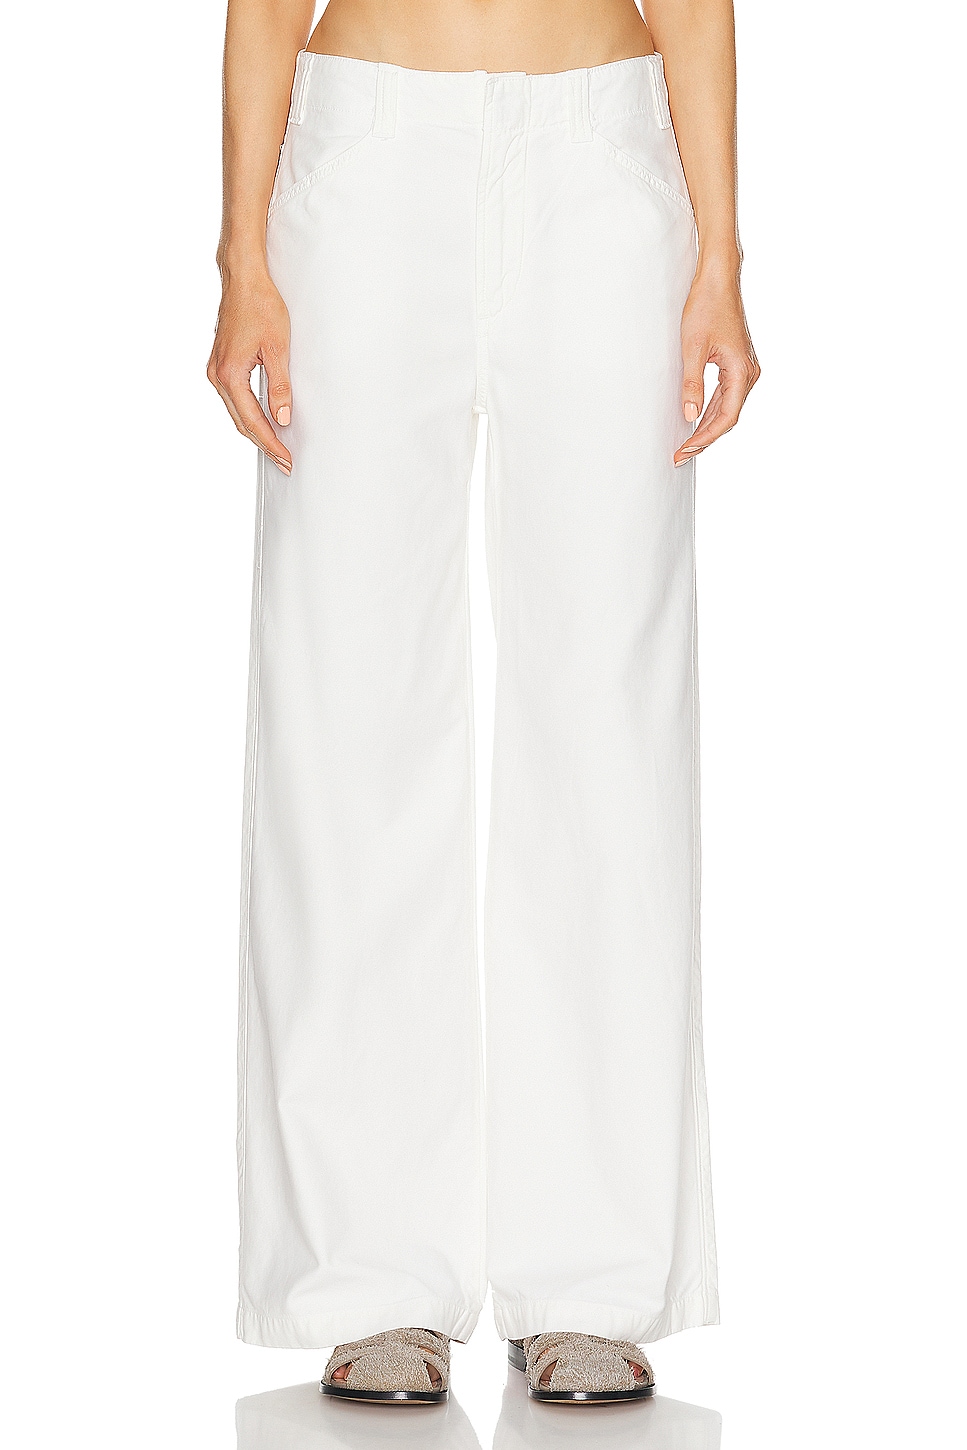 Image 1 of Citizens of Humanity Paloma Utility Trouser in Pashmina